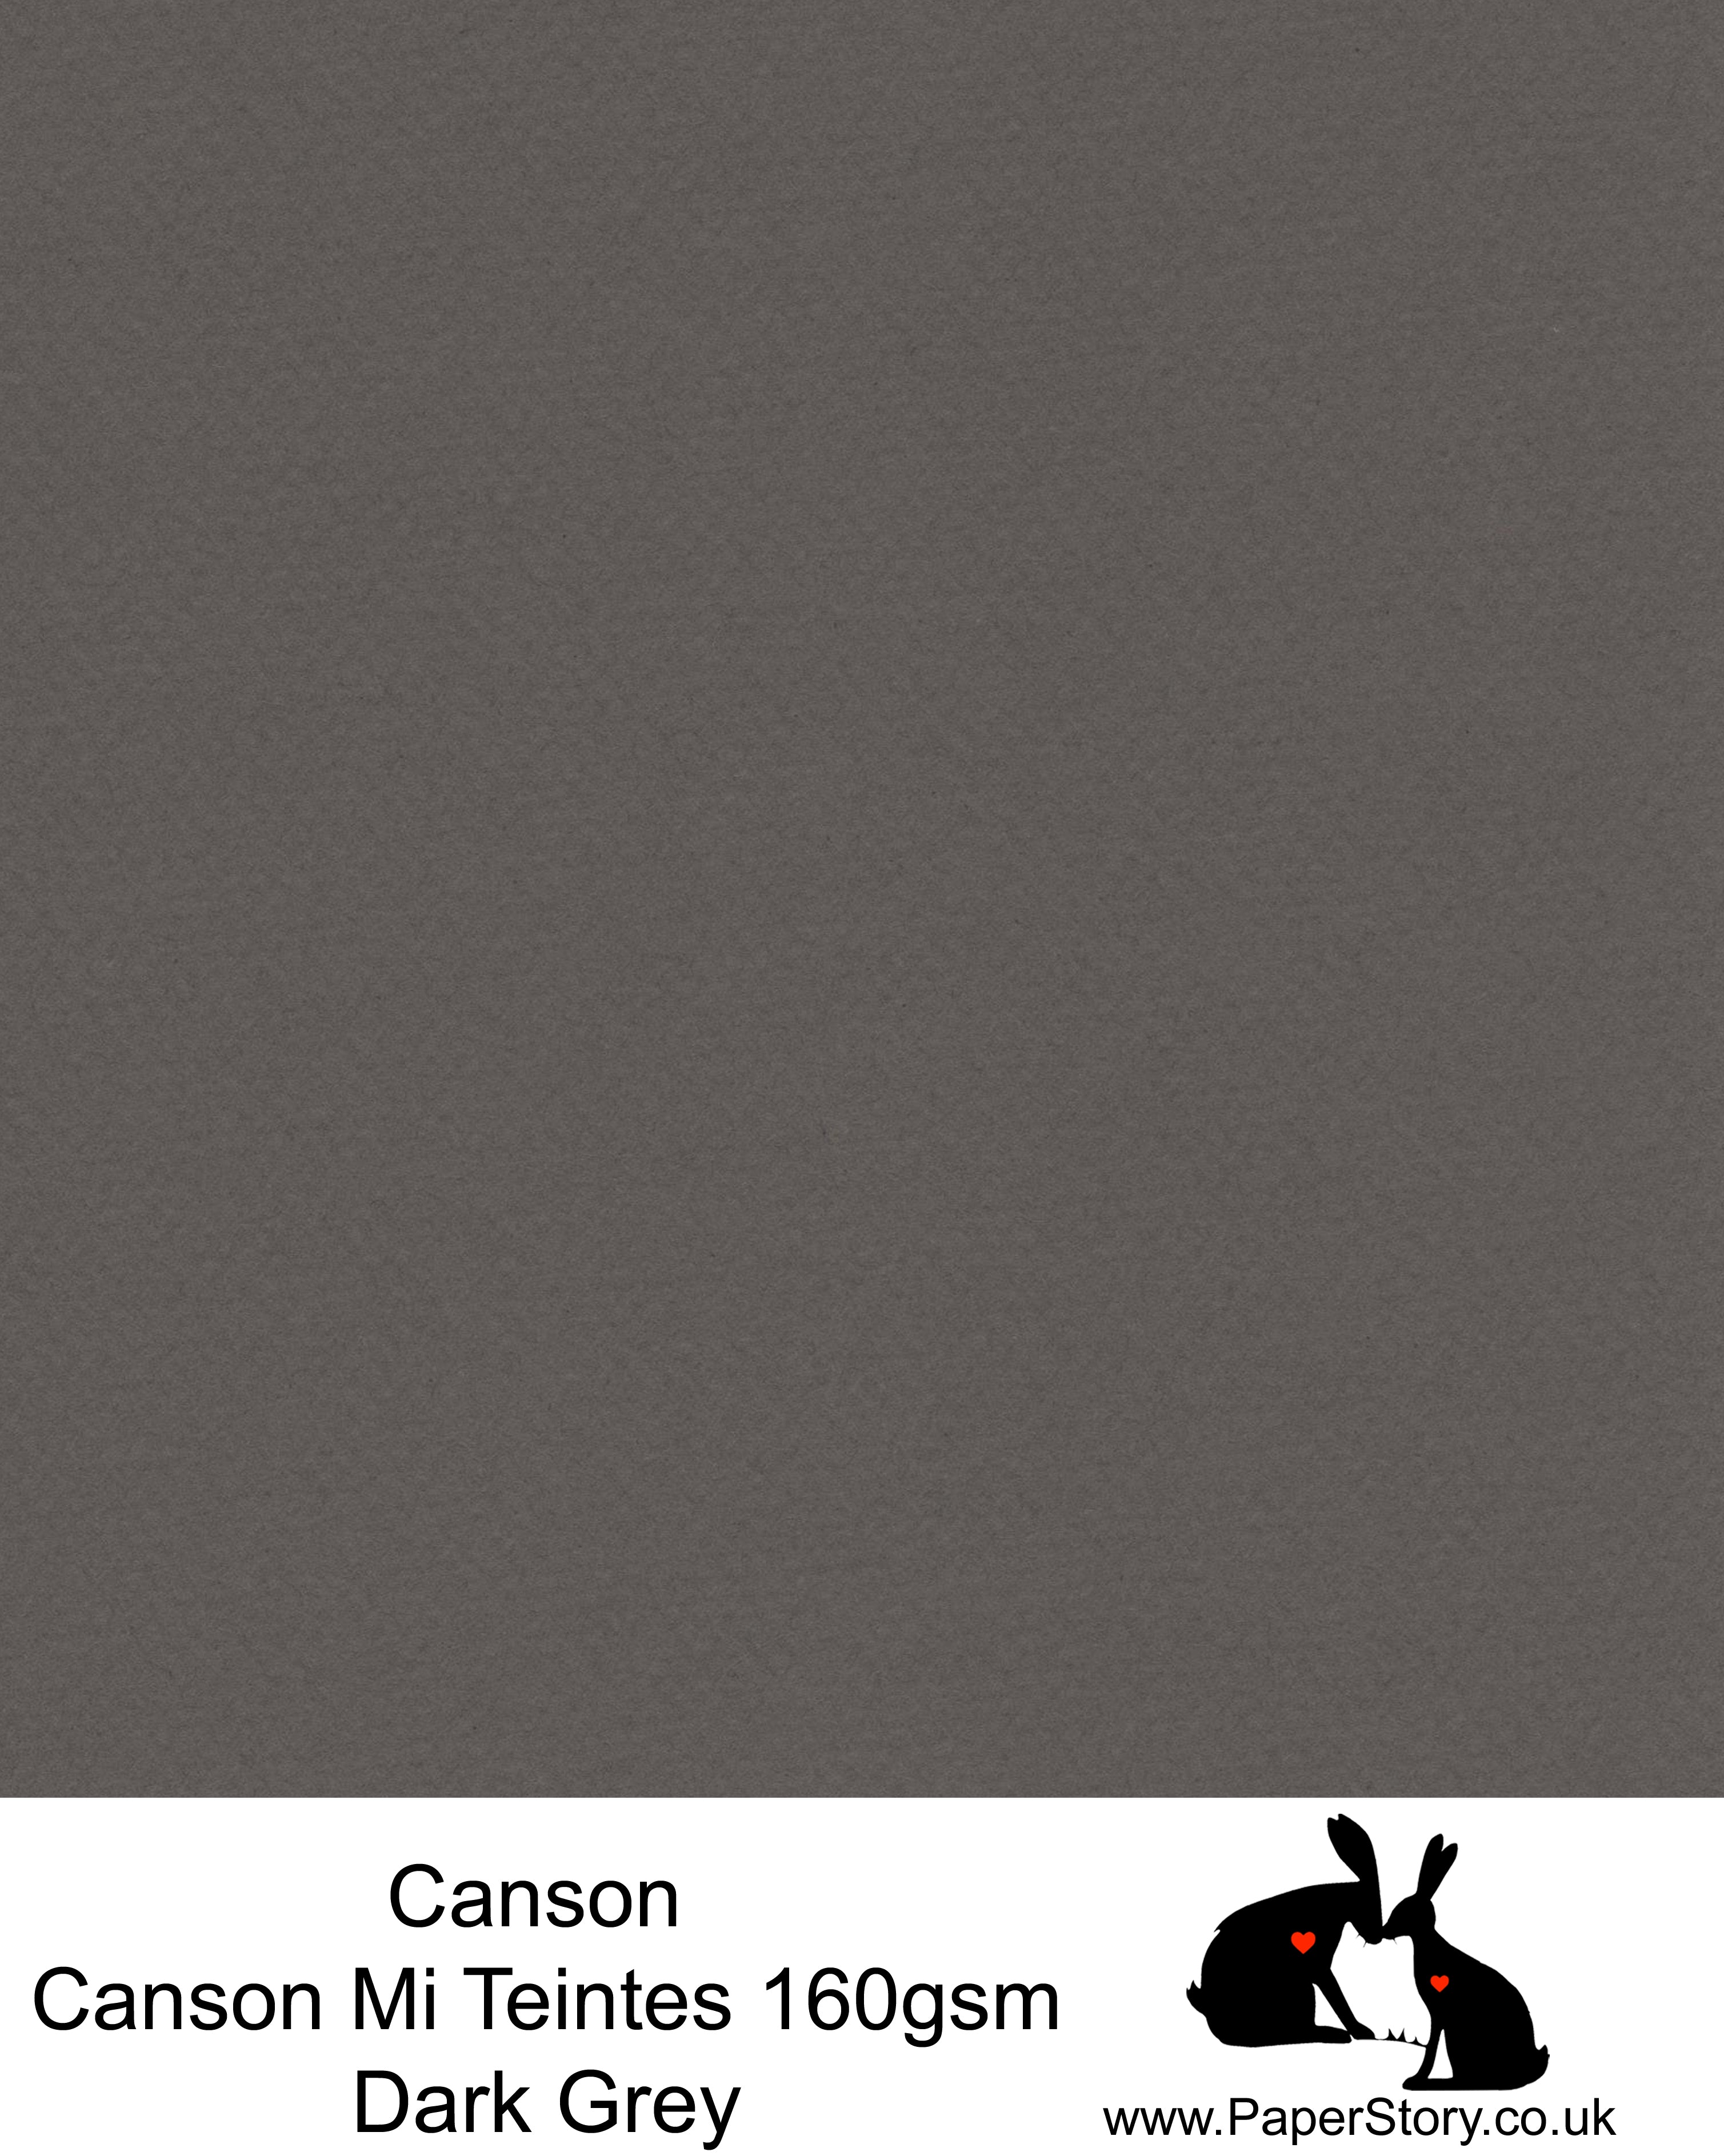 Canson Mi Teintes acid free, Dark Grey, hammered texture honeycomb surface paper 160 gsm. This is a popular and classic paper for all artists especially well respected for Pastel and Papercutting made famous by Paper Panda. This paper has a honeycombed finish one side and fine grain the other. An authentic art paper, acid free with a  very high 50% cotton content. Canson Mi-Teintes complies with the ISO 9706 standard on permanence, a guarantee of excellent conservation  